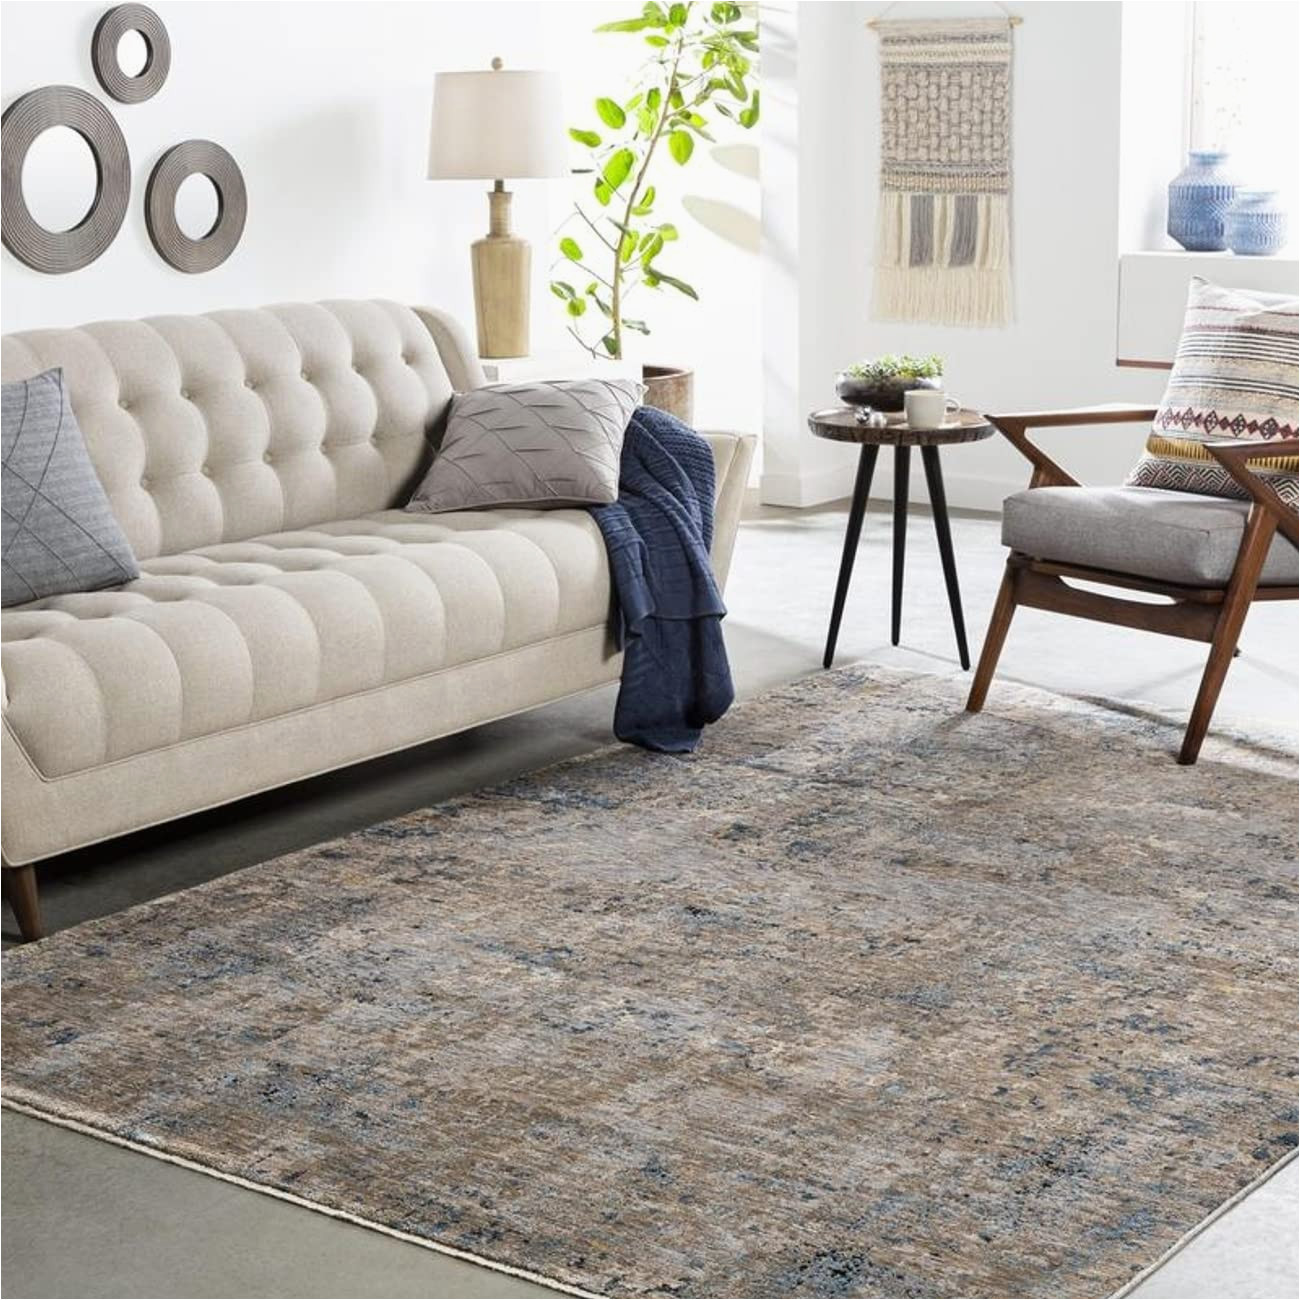 10×14 area Rugs On Sale Mark&day area Rugs, 10×14 Rul Modern Dark Brown area Rug, Brown / Gray Carpet for Living Room, Bedroom or Kitchen (10′ X 14′)